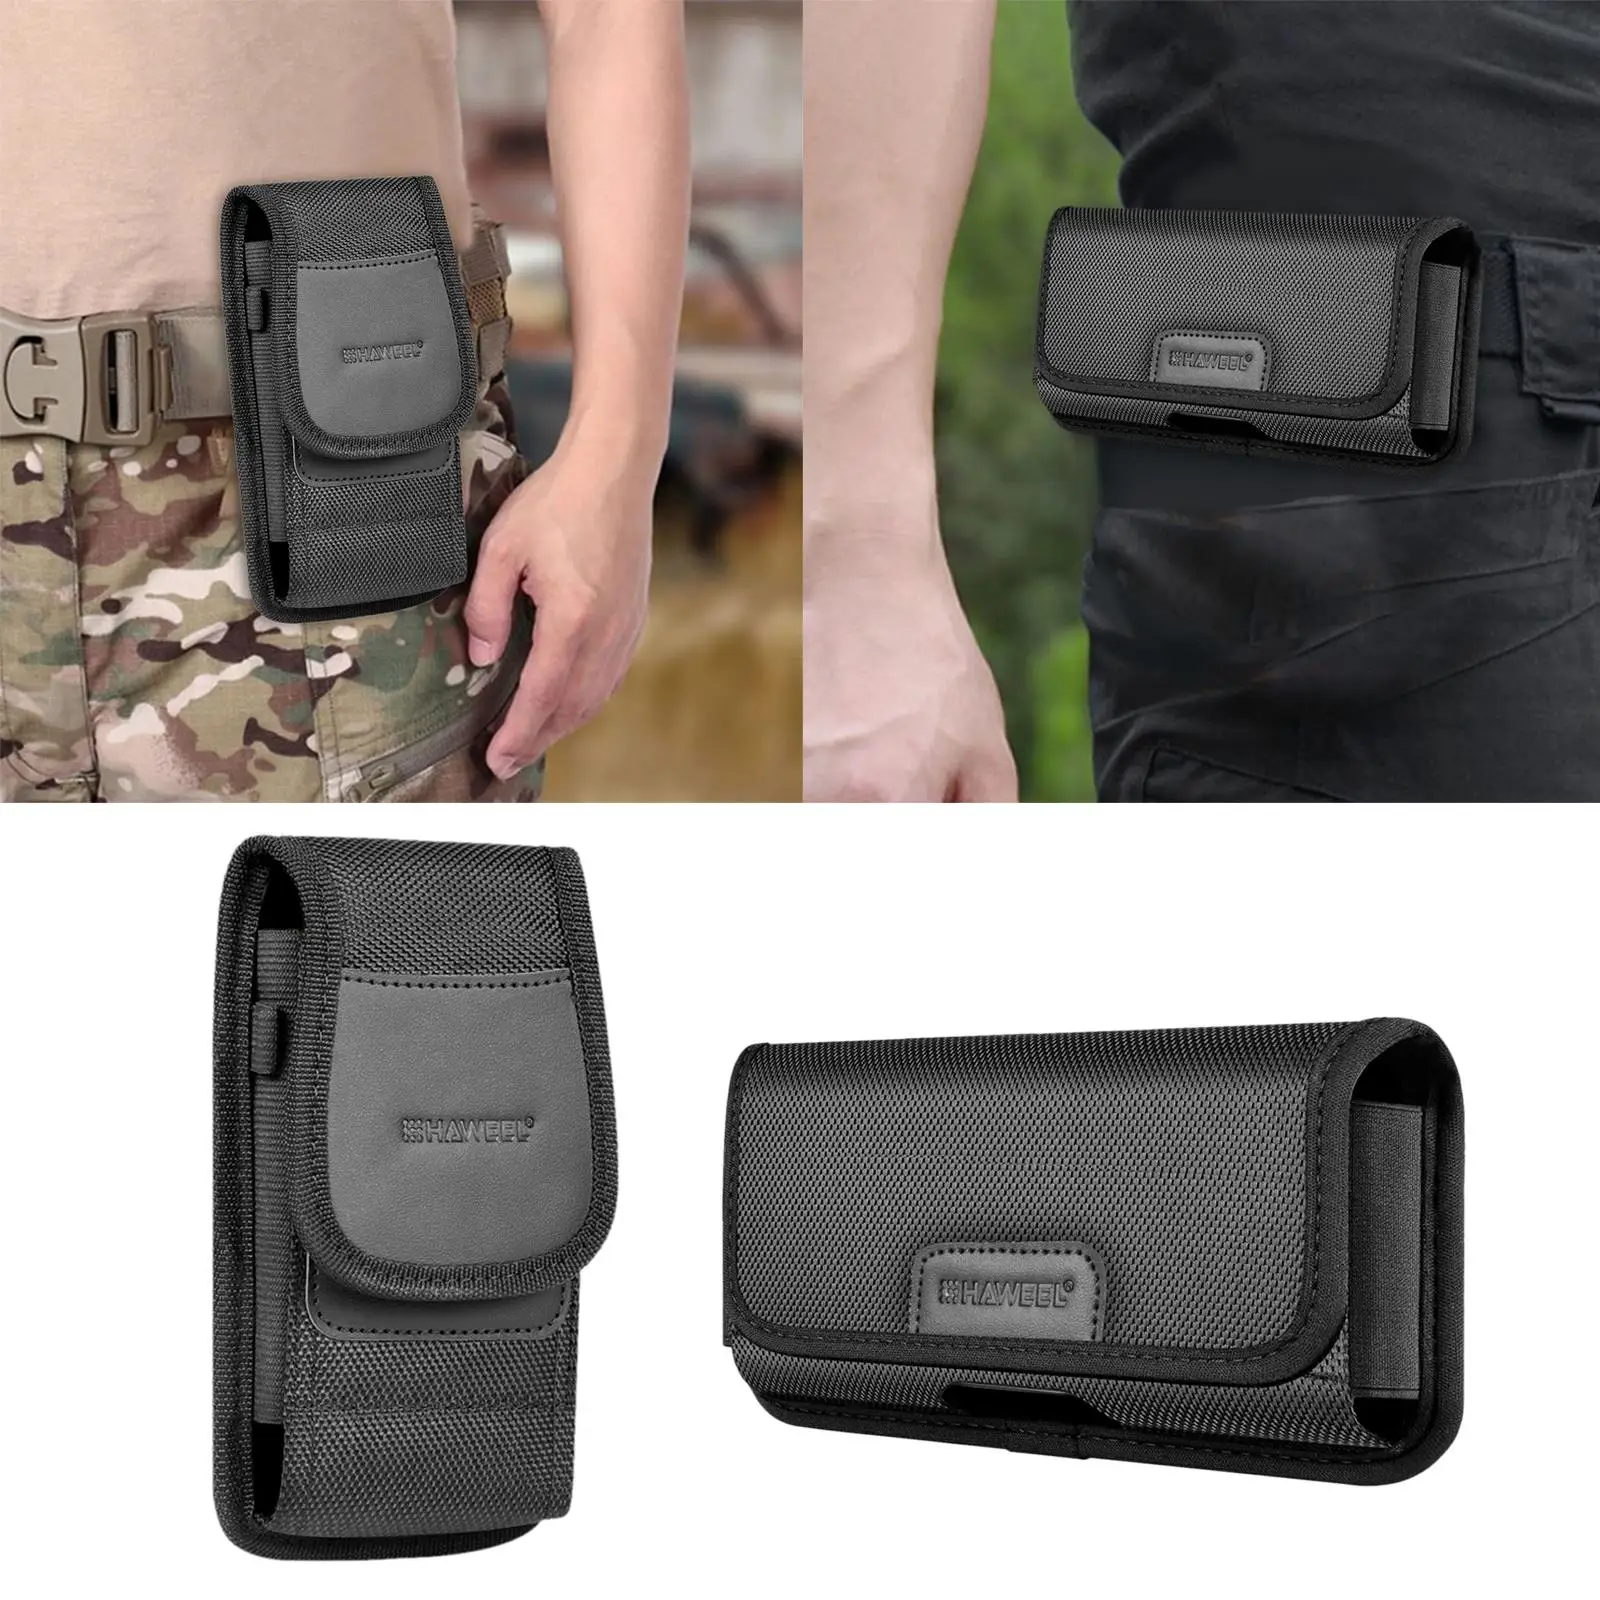 Phone Holster Full Cover Camping Black Carrying Pouch Smartphone Accessories